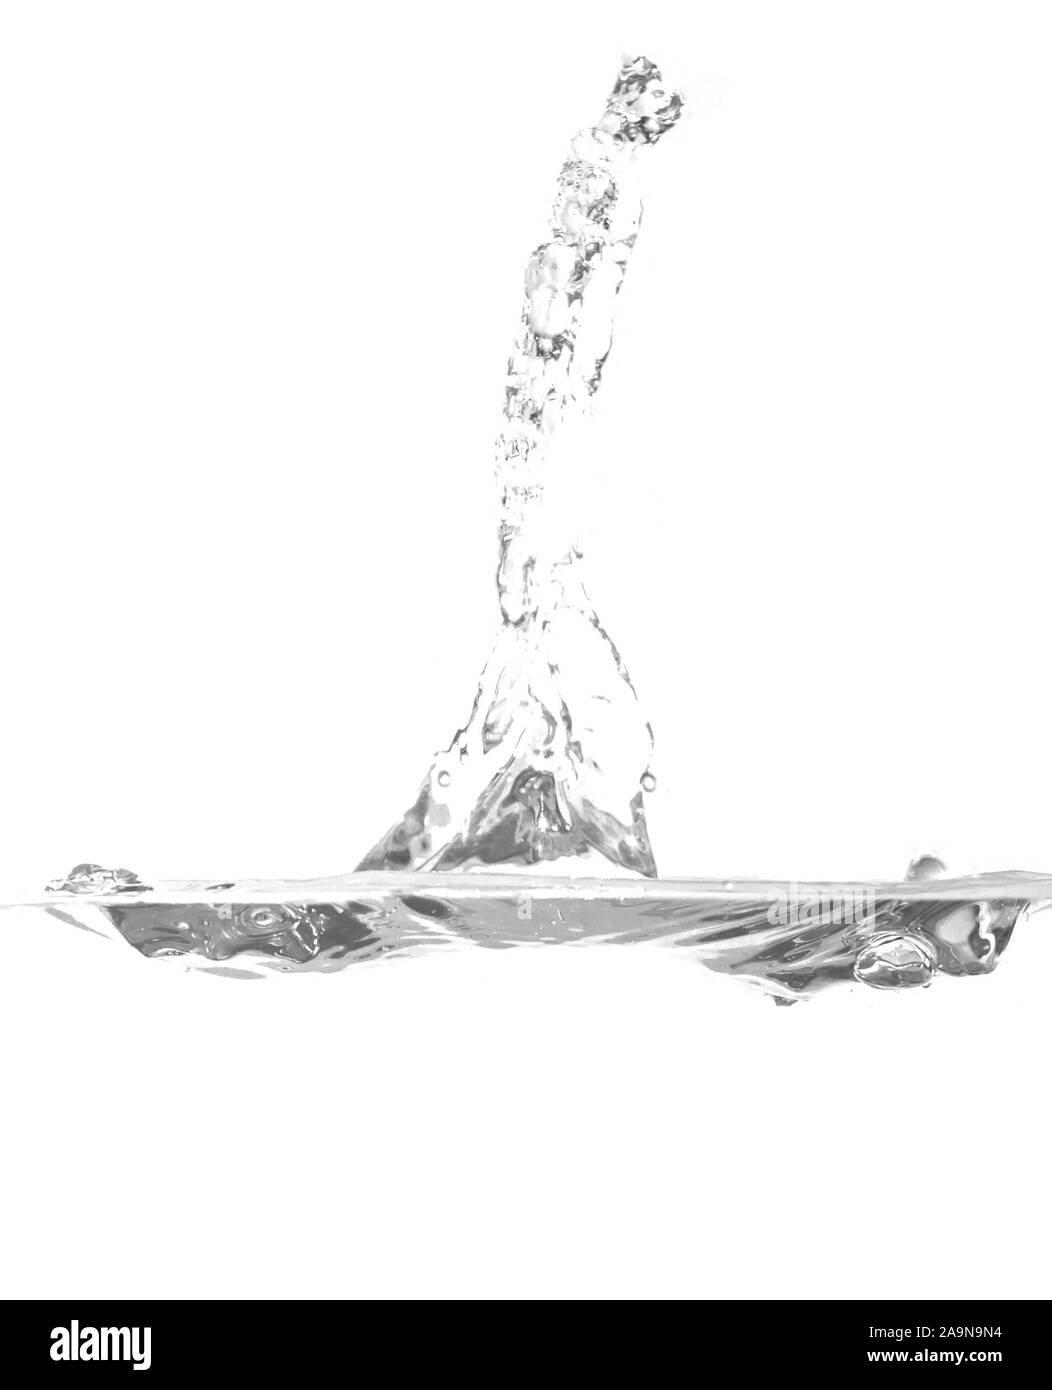 Water splash and drop on white background Stock Photo